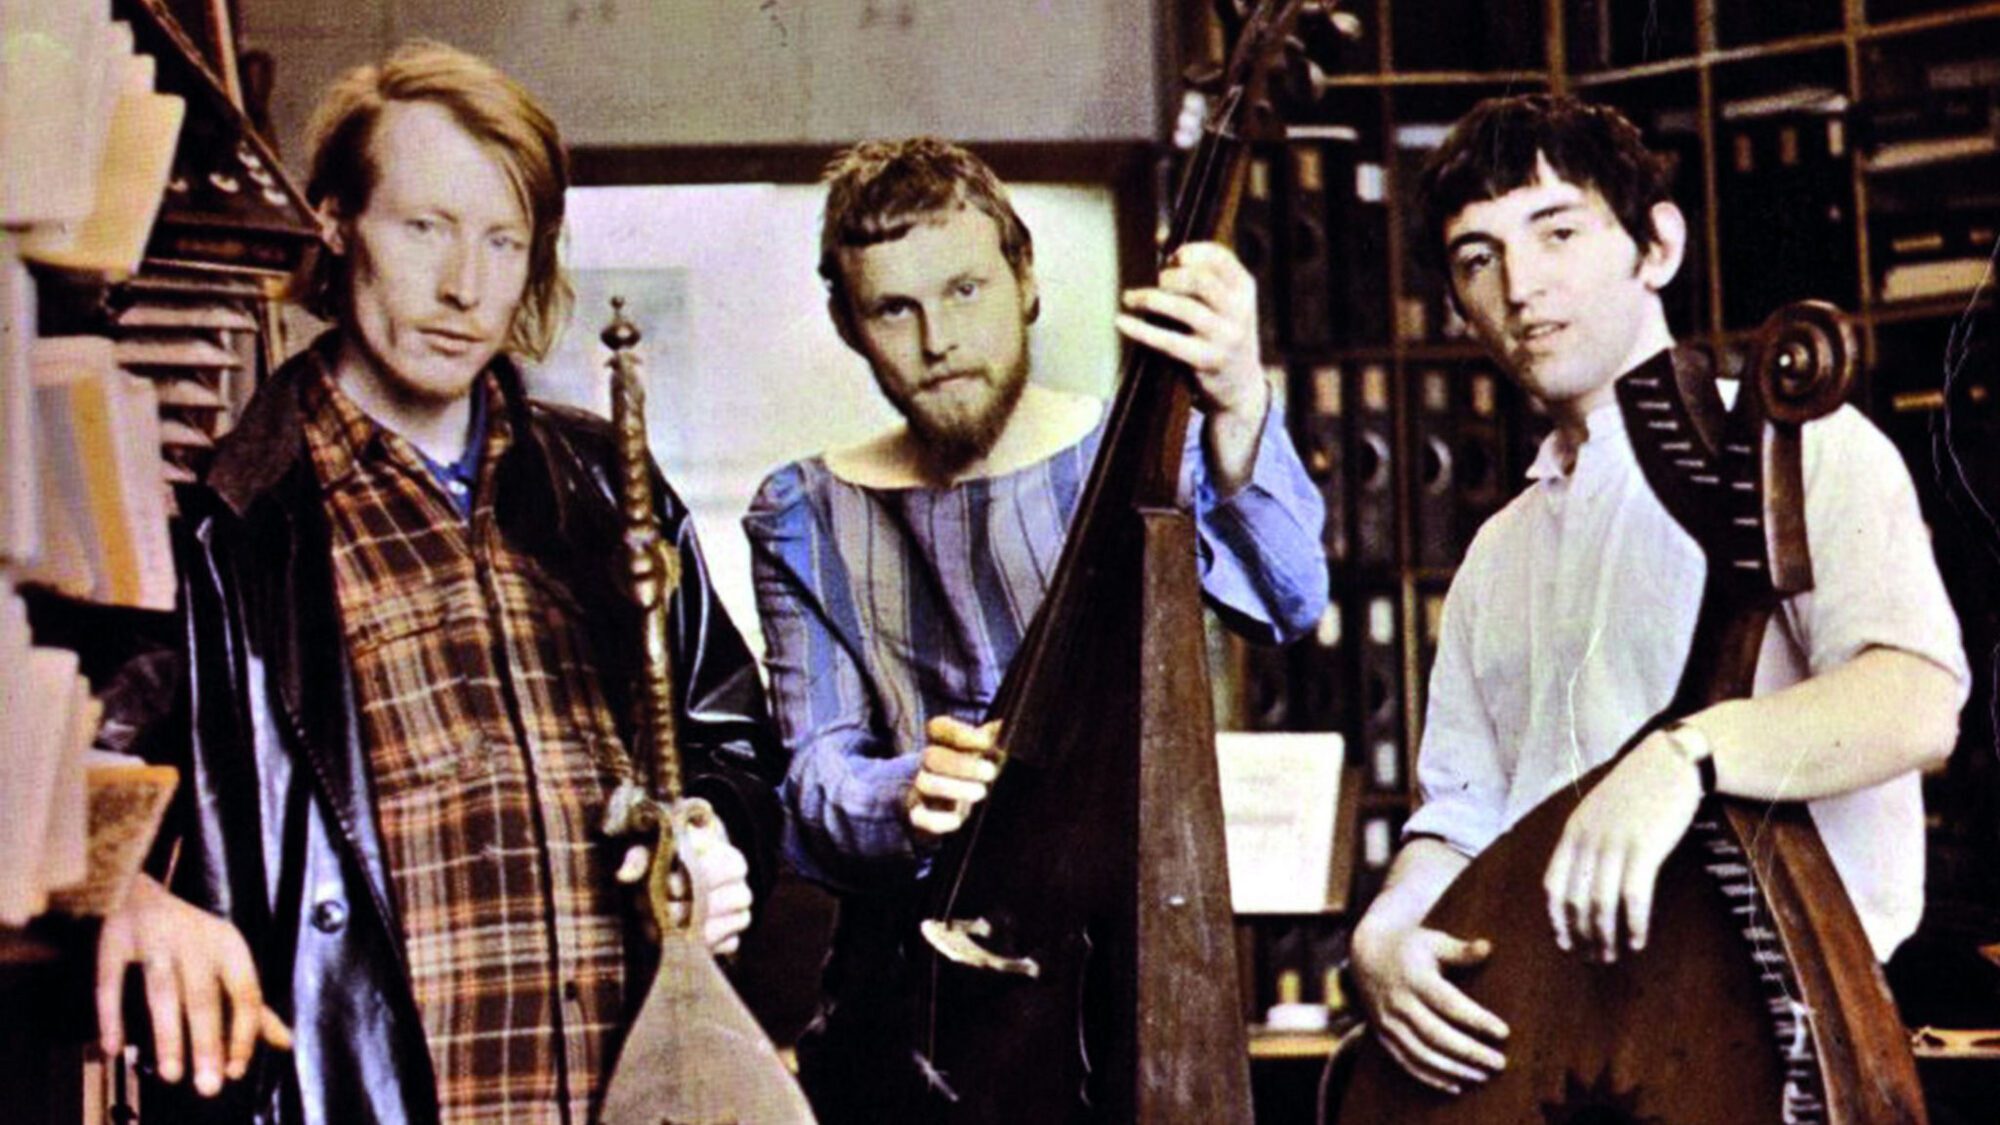 Photo of the Incredible String Band